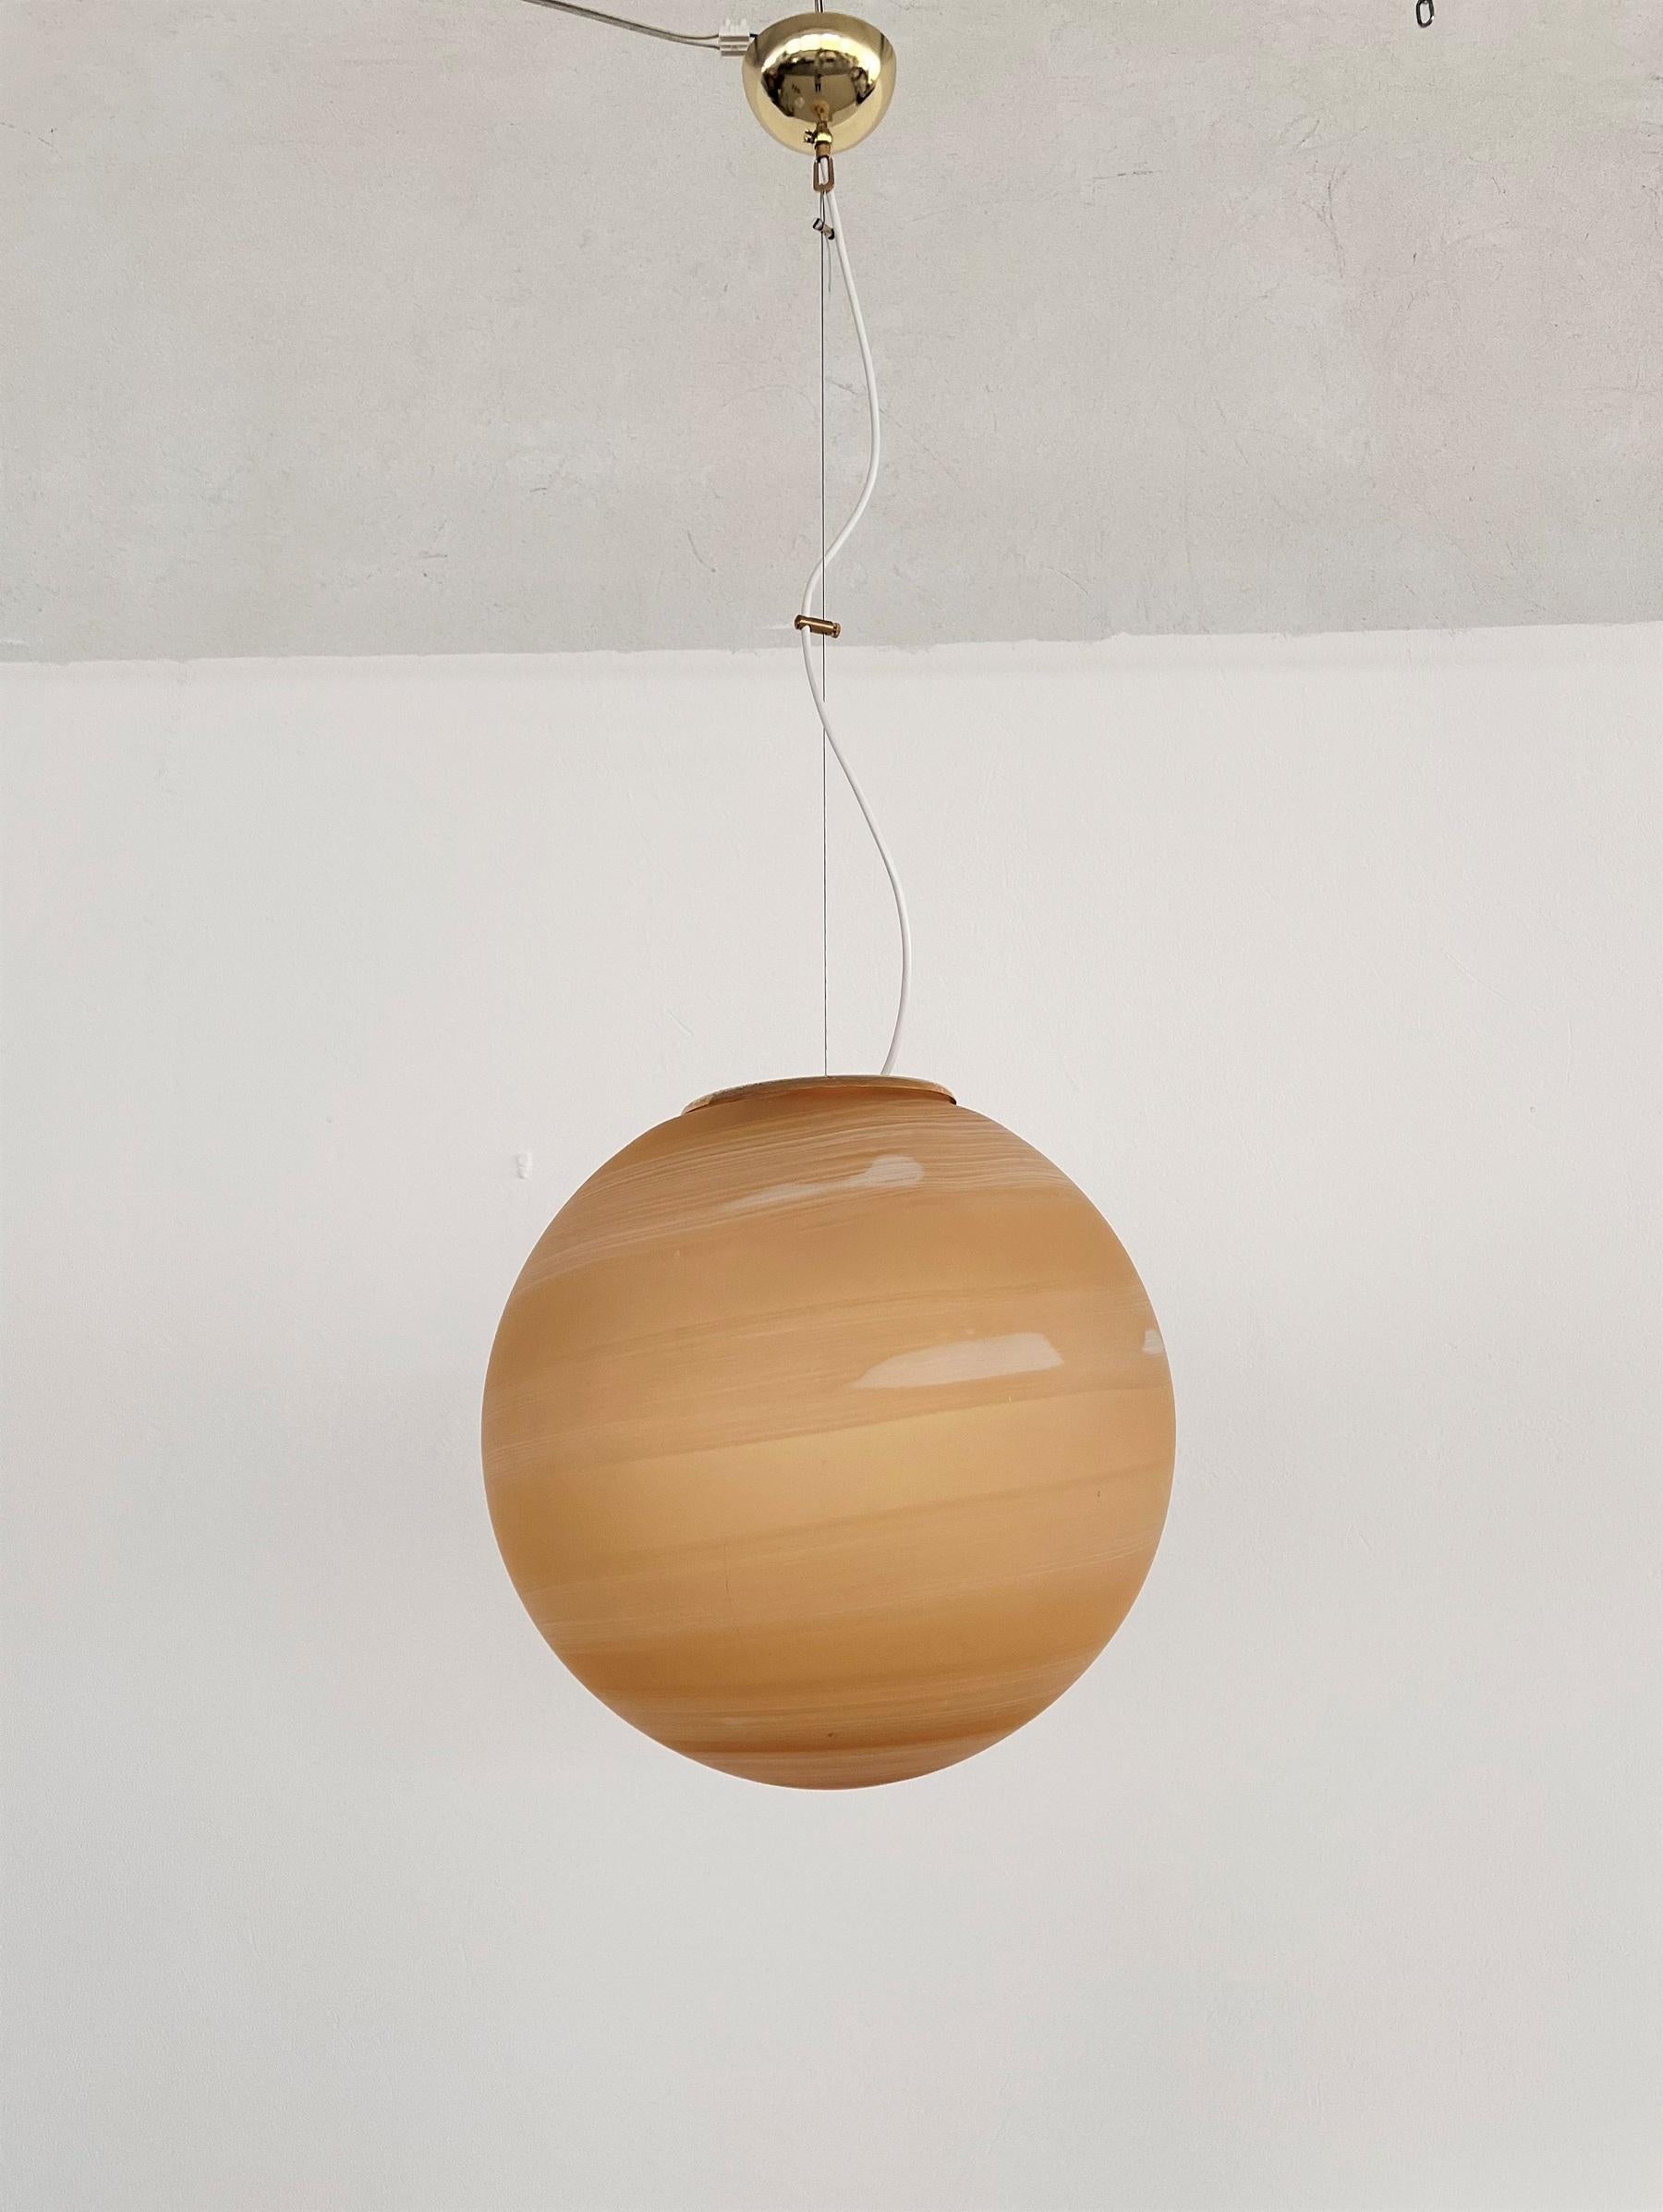 Beautiful vintage Murano glass globe pendant lamp with very heavy hand-crafted Murano glass and brass details.
The diameter of the glass globe is 15,7 in, and the actual height is 41,3in ( adjustable).
Made in Italy in the 1970s.
The lamps glass